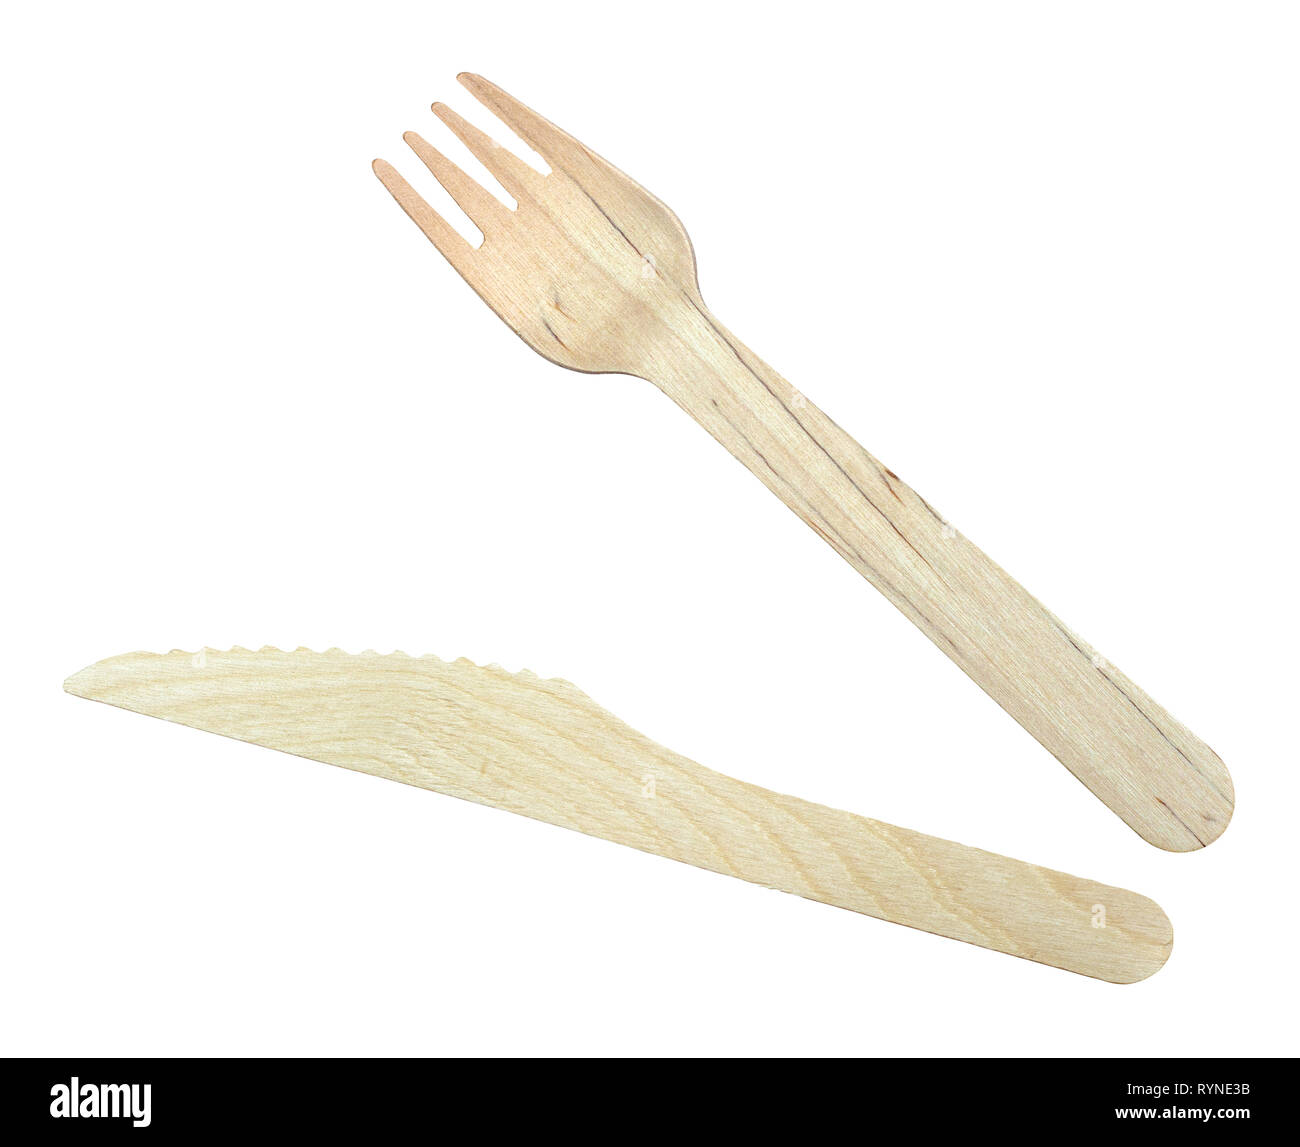 Isolated Wooden Knife And Fork For Take-out Food On A White Background Stock Photo